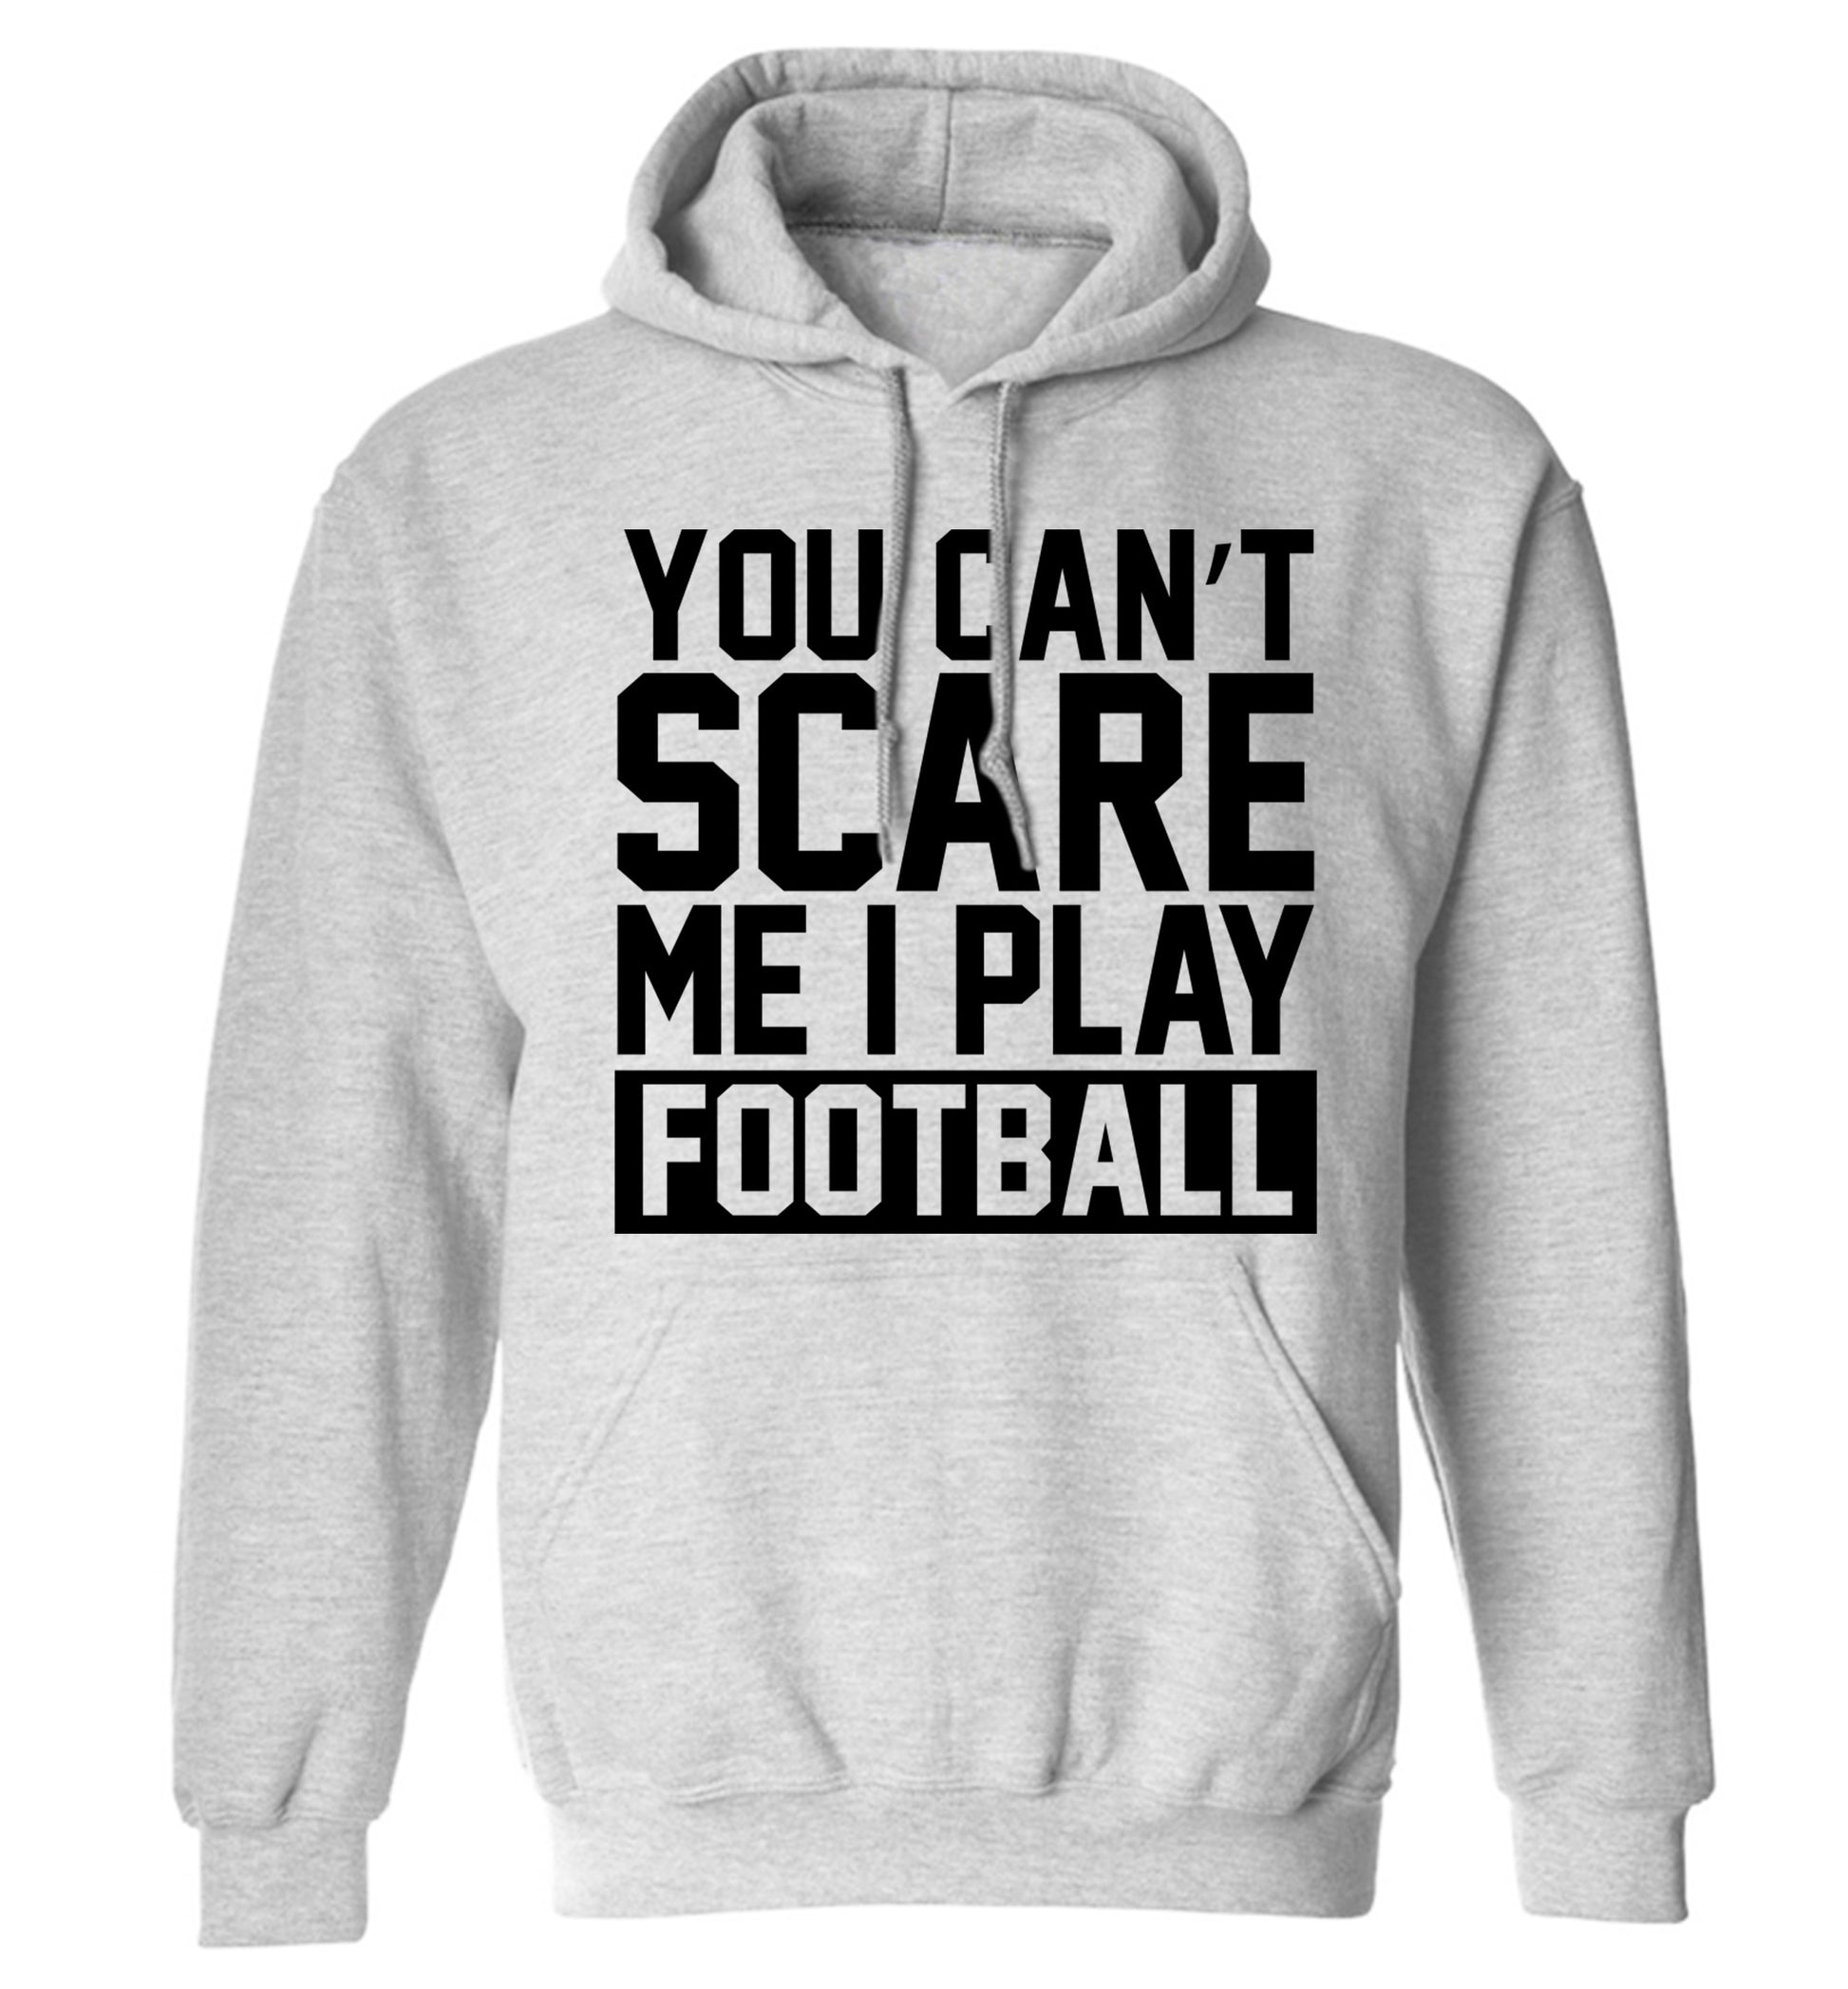 You can't scare me I play football adults unisex grey hoodie 2XL